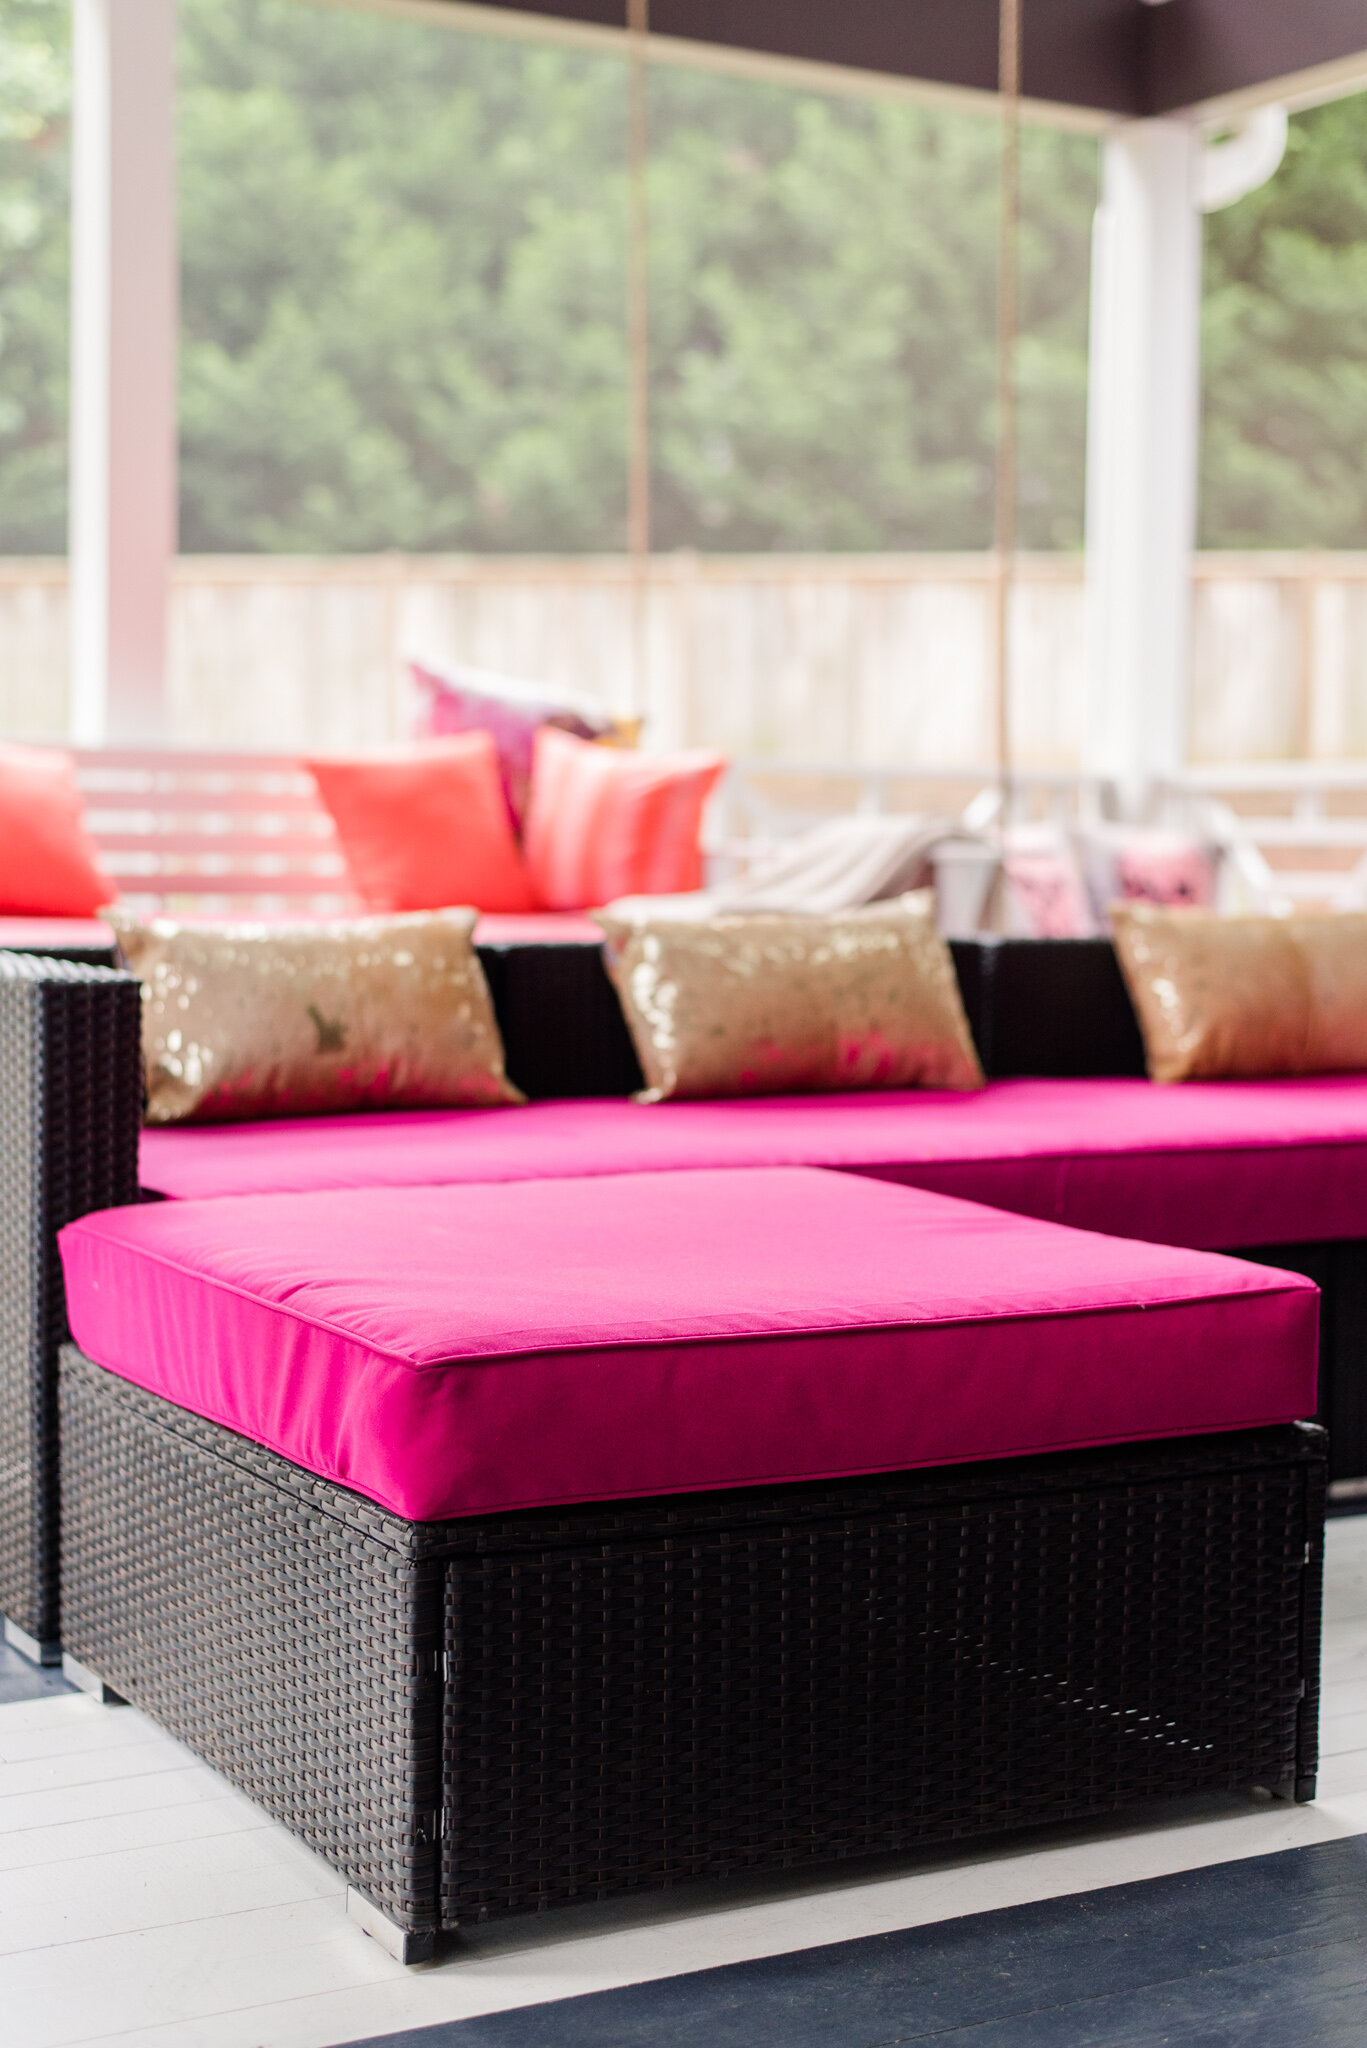 Dwell-Chic-Contemporary-Vibrant-Outdoor-Porch-Outdoor-Sofa-Details.jpg